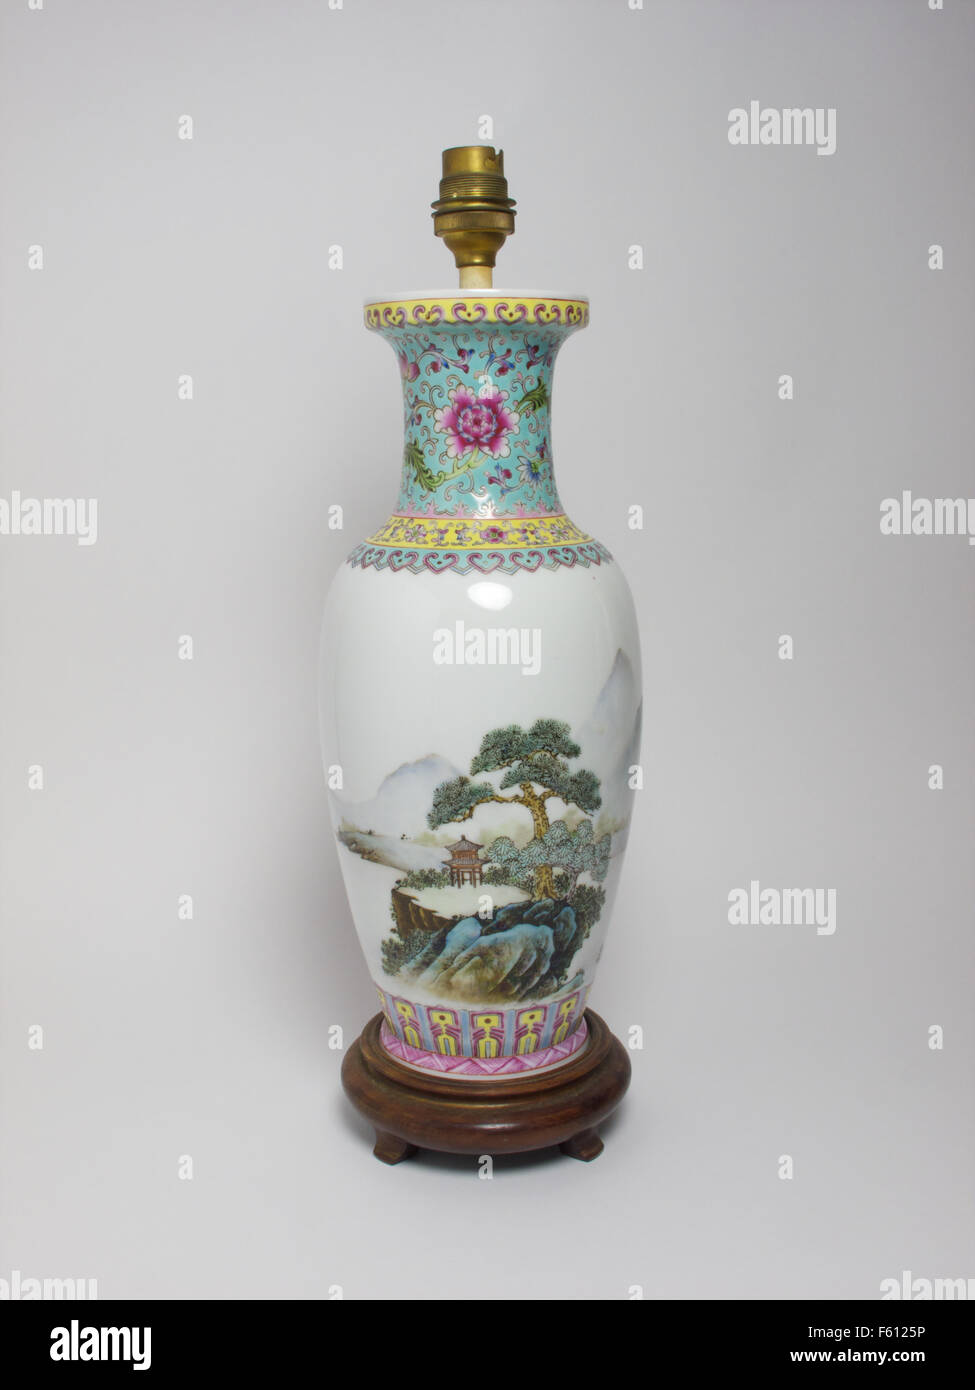 Vintage Chinese Famille Rose porcelain table lamp Stock Photo